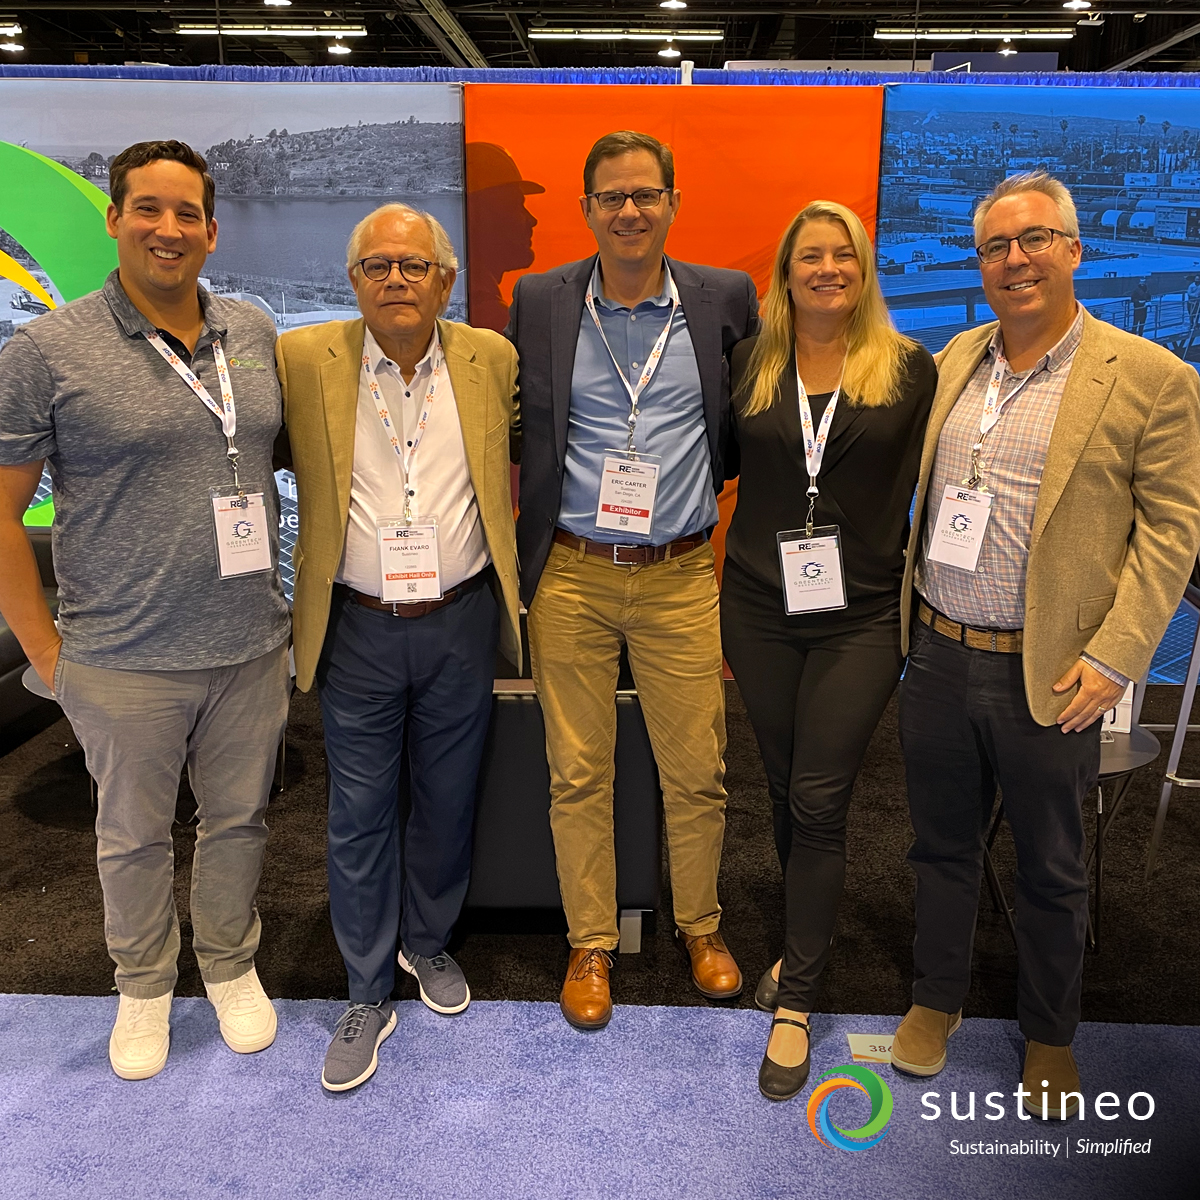 Thanks to everyone who came by our RE+ booth last week. We had an incredible time. 
-
-
-
#sustineo #re+ #spi #solarconvention #solar #solarenergy #solarepc #commercialsolar